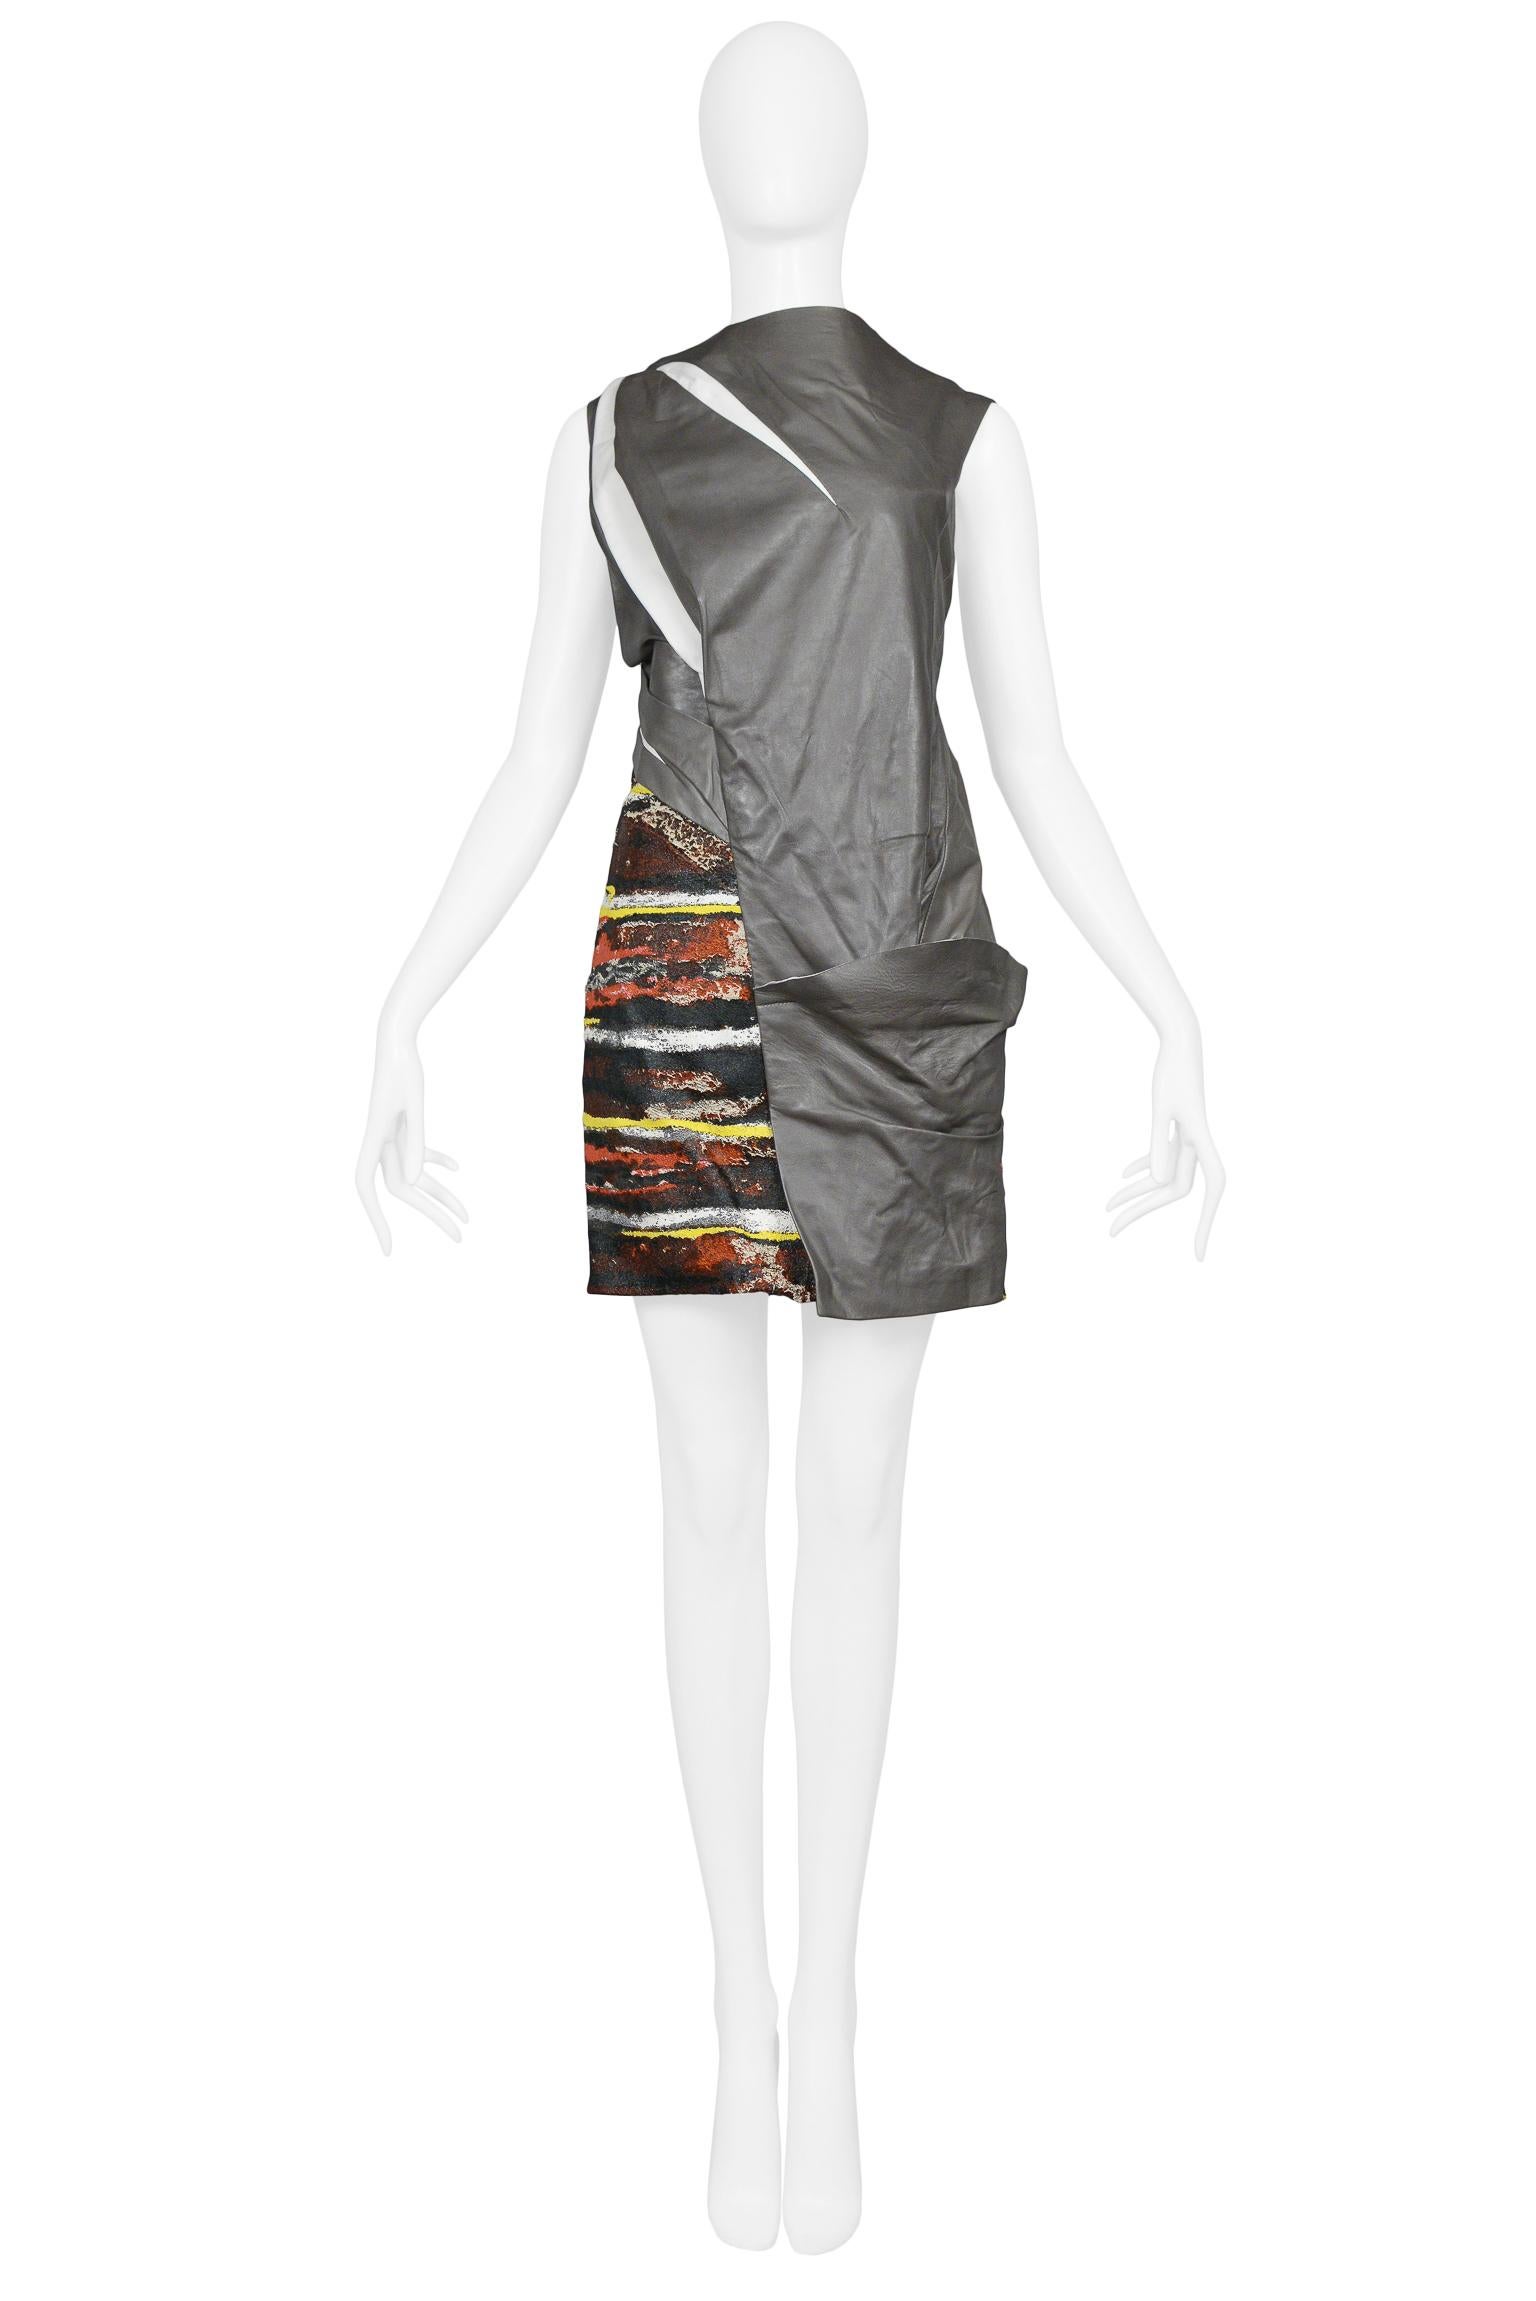 Resurrection Vintage is excited to offer a vintage Balenciaga by Nicolas Ghesquiere grey asymmetrical slashed leather dress featuring white leather trim and insets, a multicolor marbled paint splatter leather under-dress with a unique texture, and